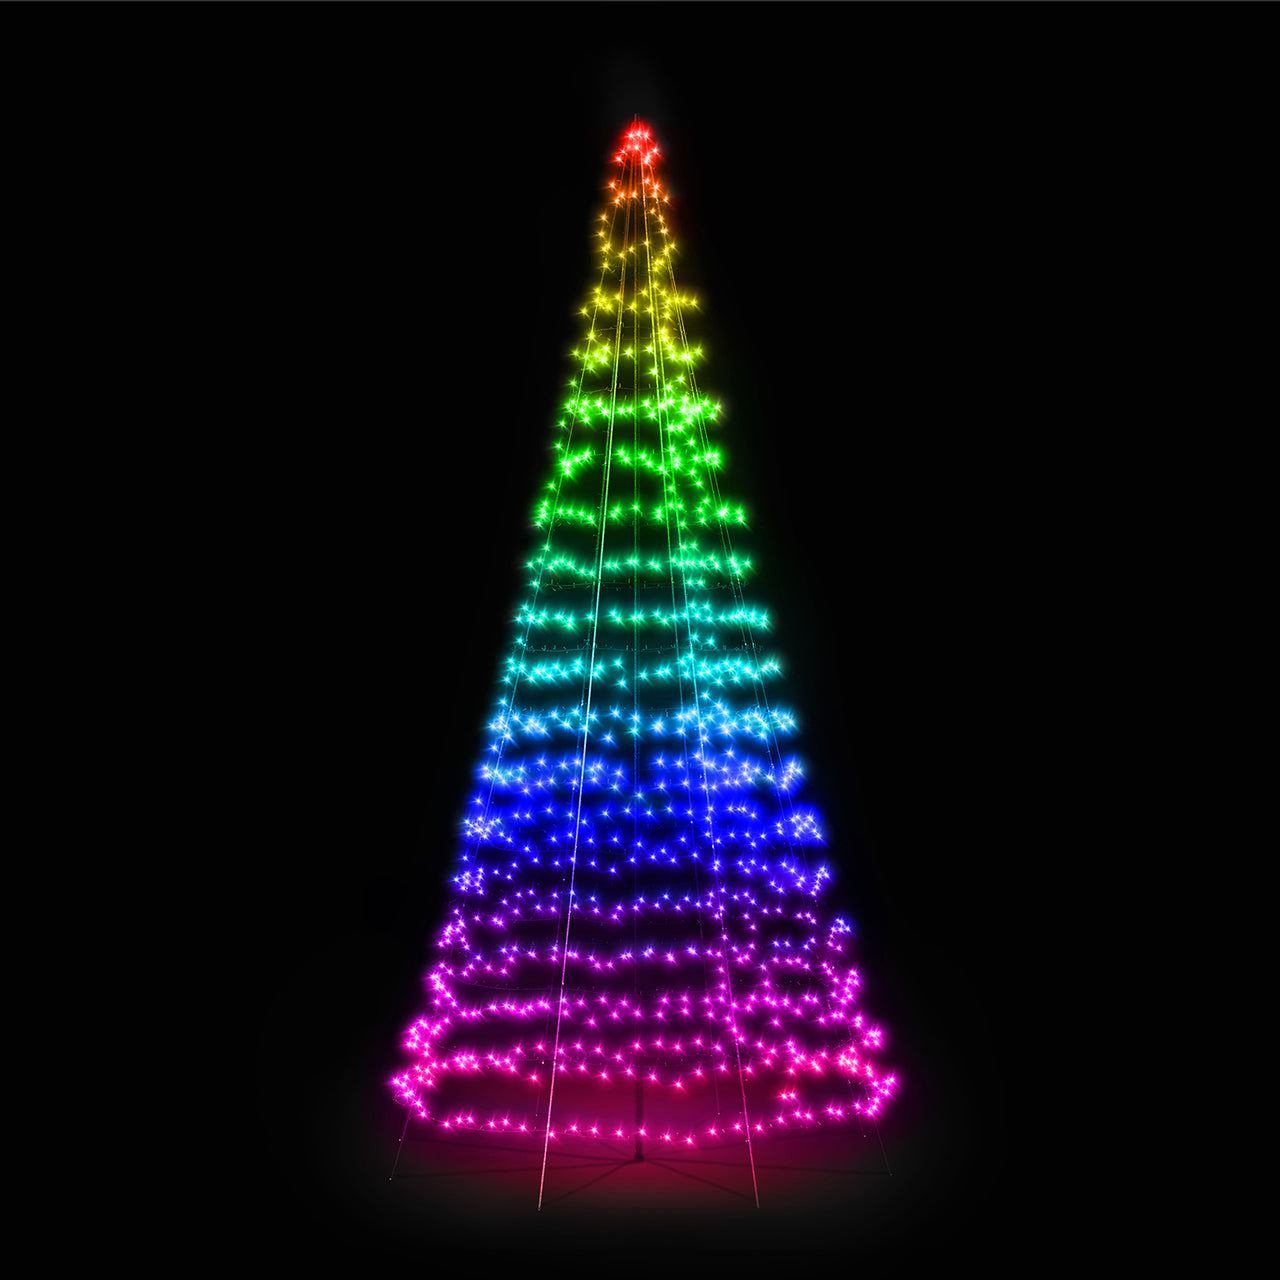 4m 750 LED Twinkly Smart App Controlled Outdoor Christmas Tree Multi Coloured & White Edition